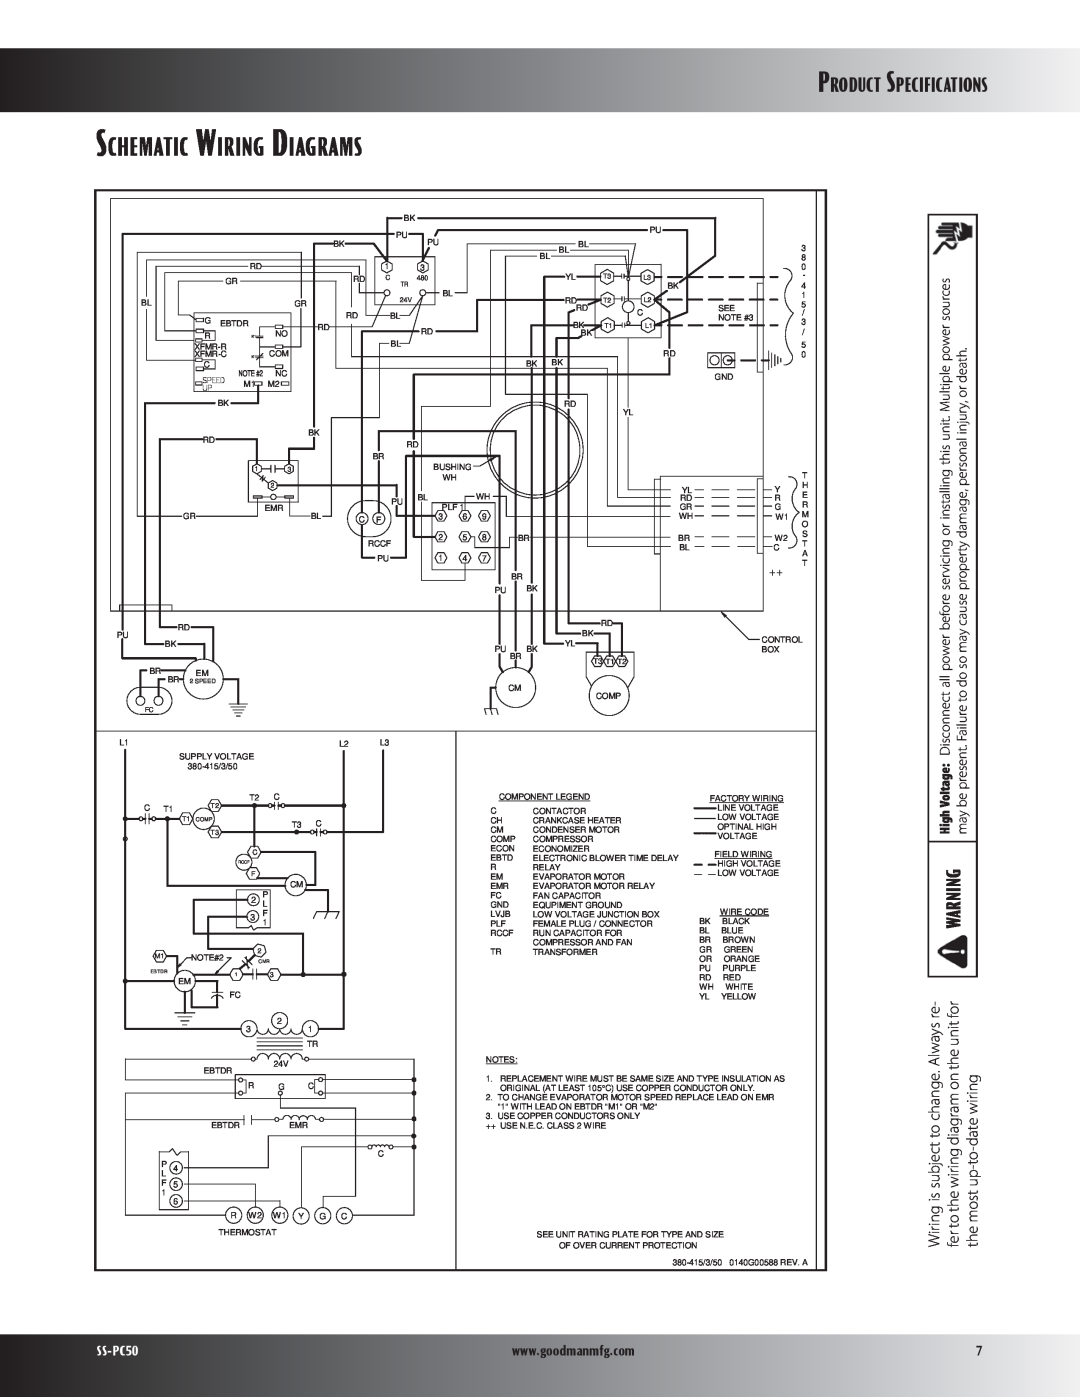 Goodman Mfg PC50 specifications Product Specifications, Schematic Wiring Diagrams 